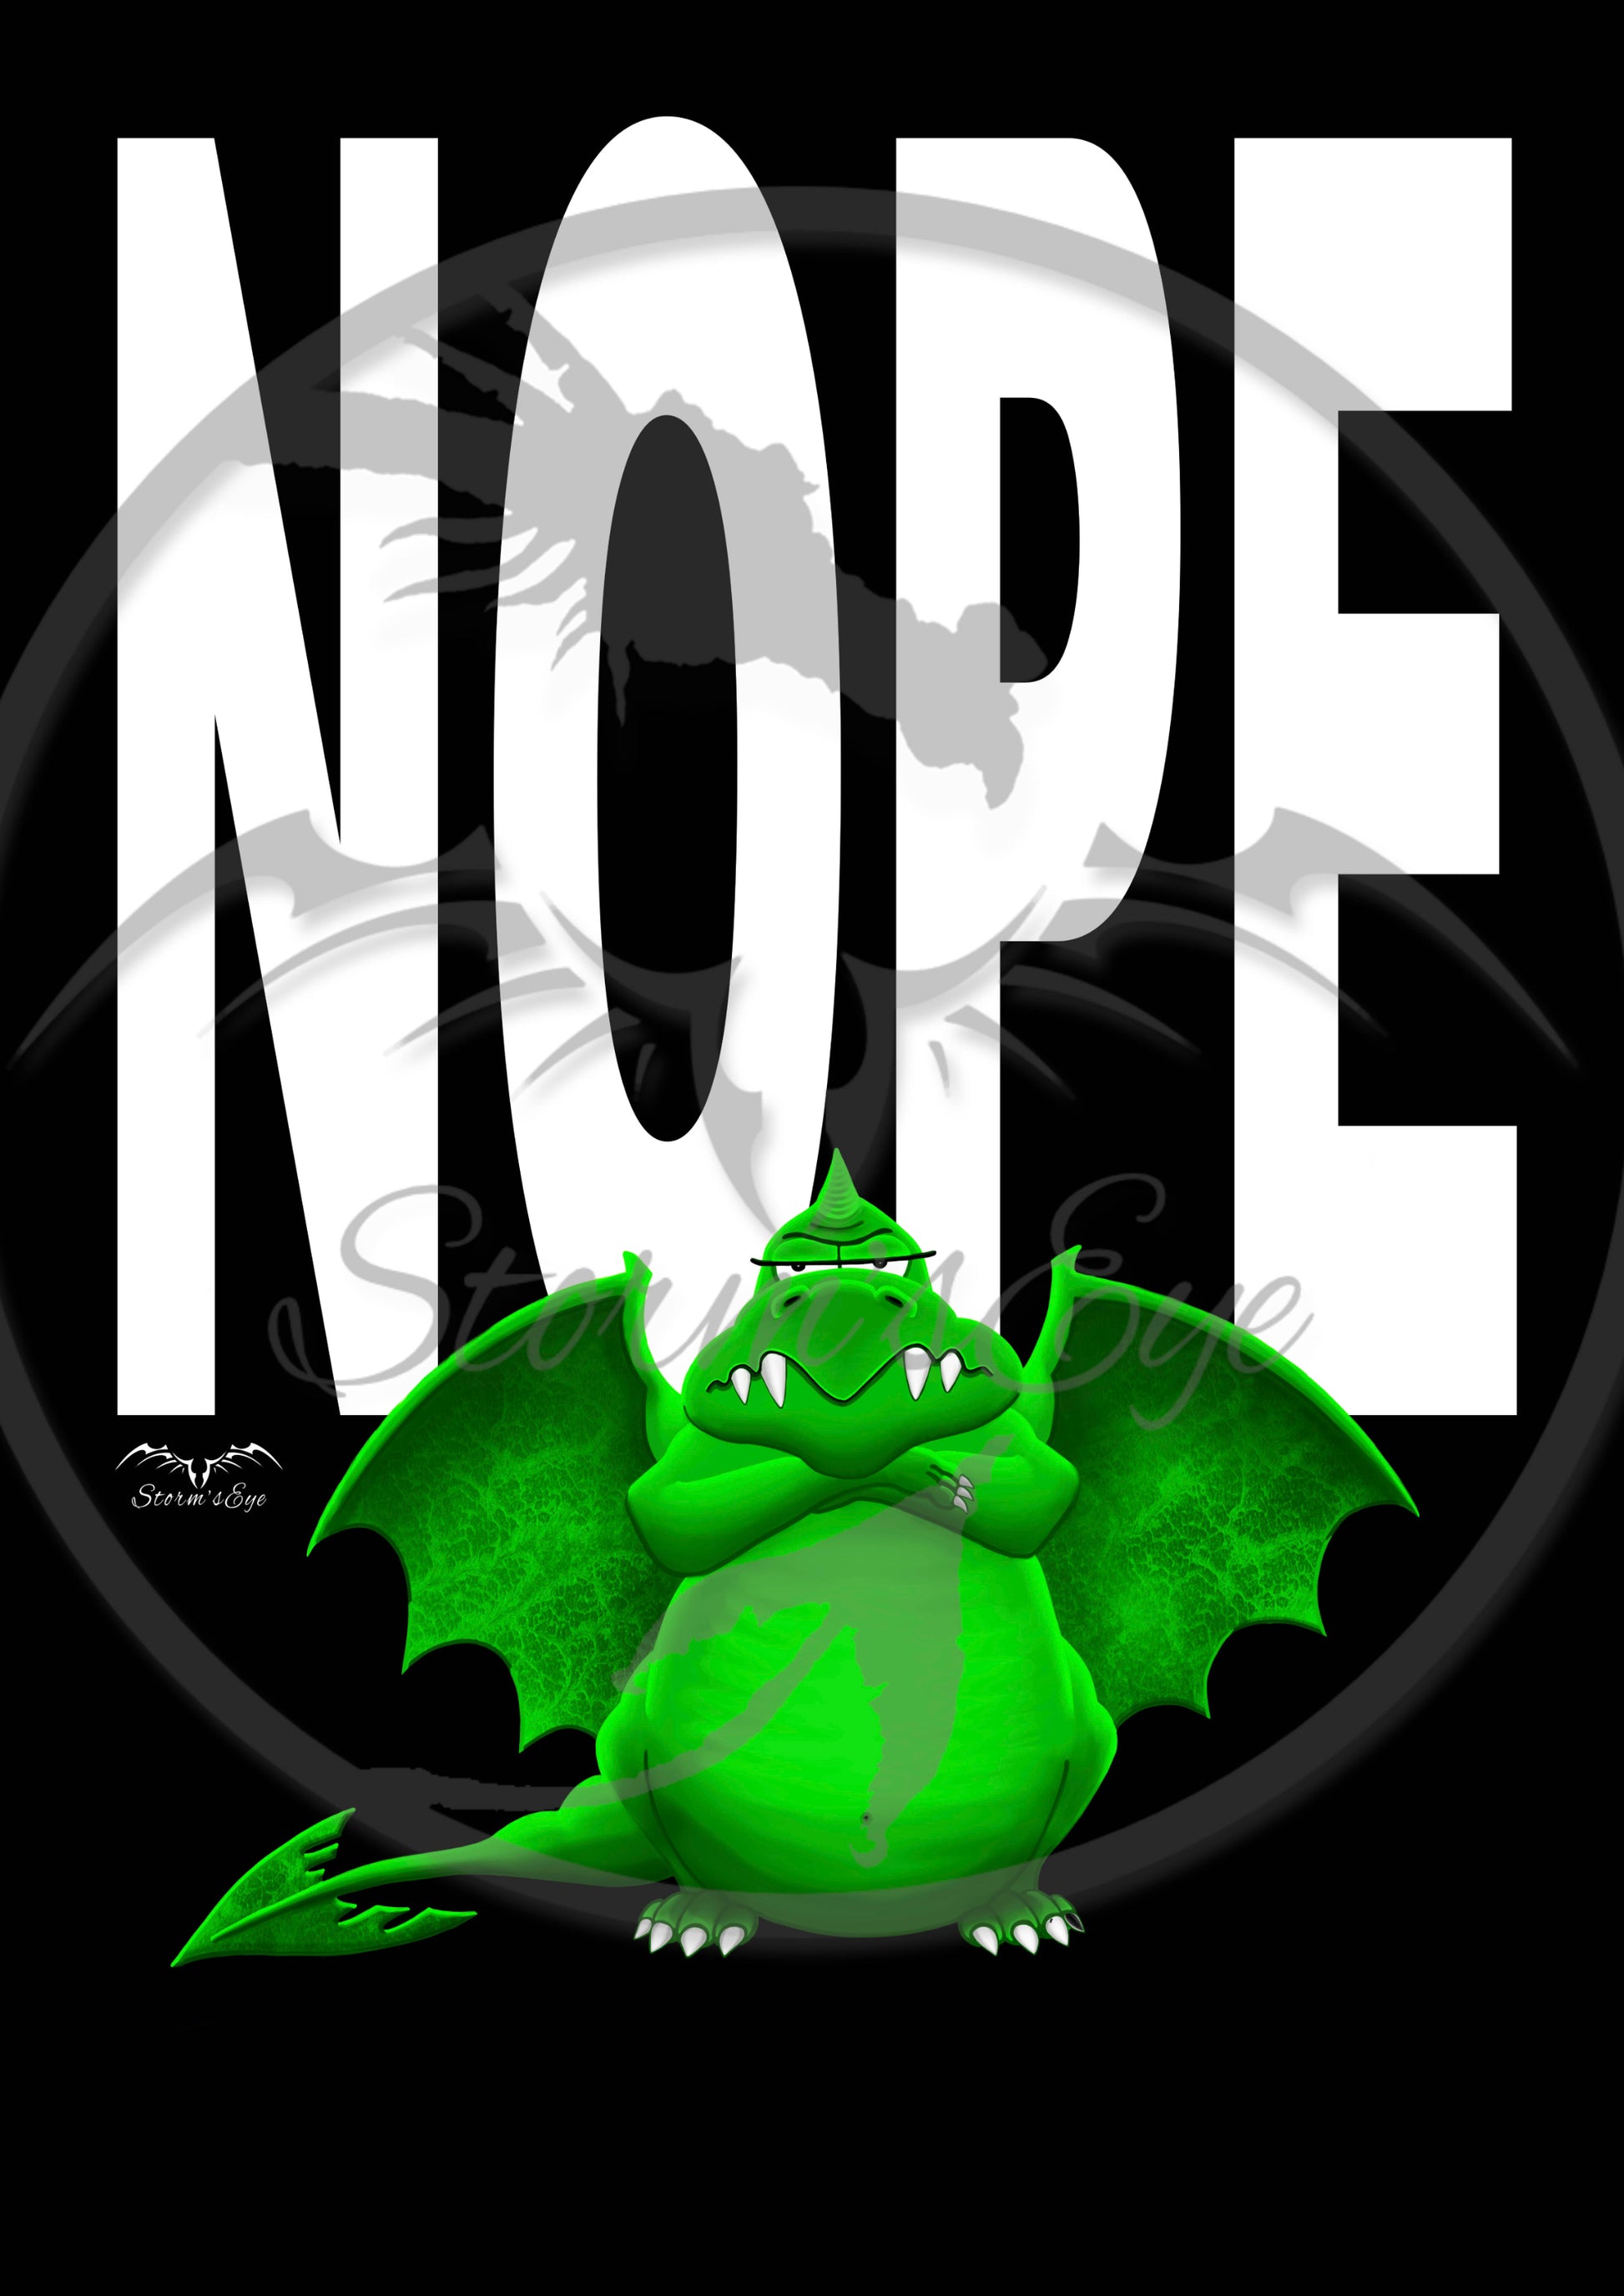 Funny Nope Dragon design by Stormseye Design